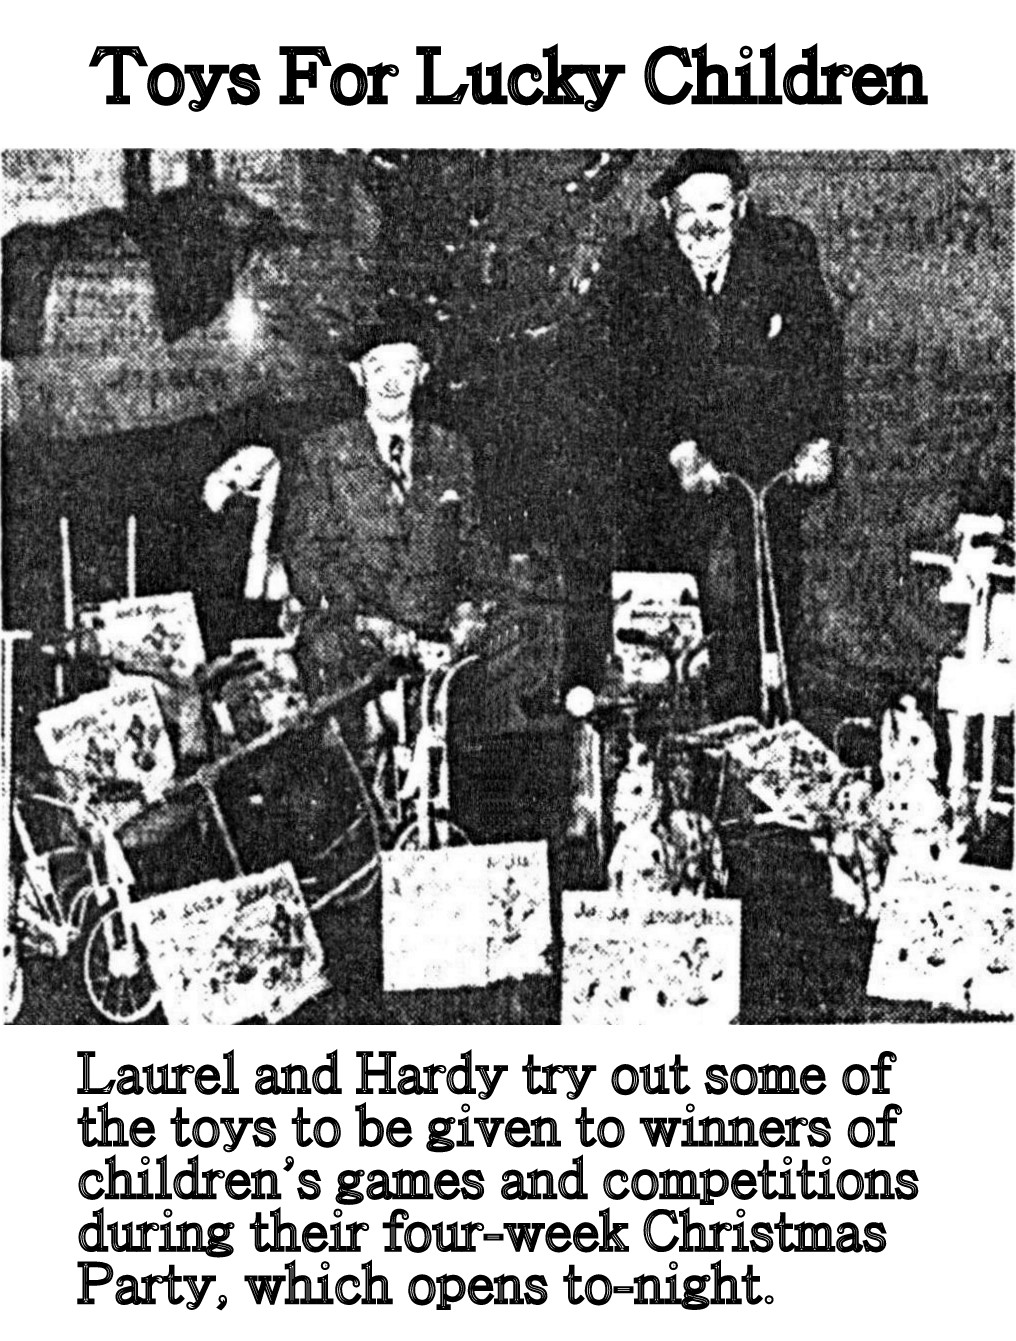 Laurel and Hardy books Christmas 1953 by A.J Marriot.